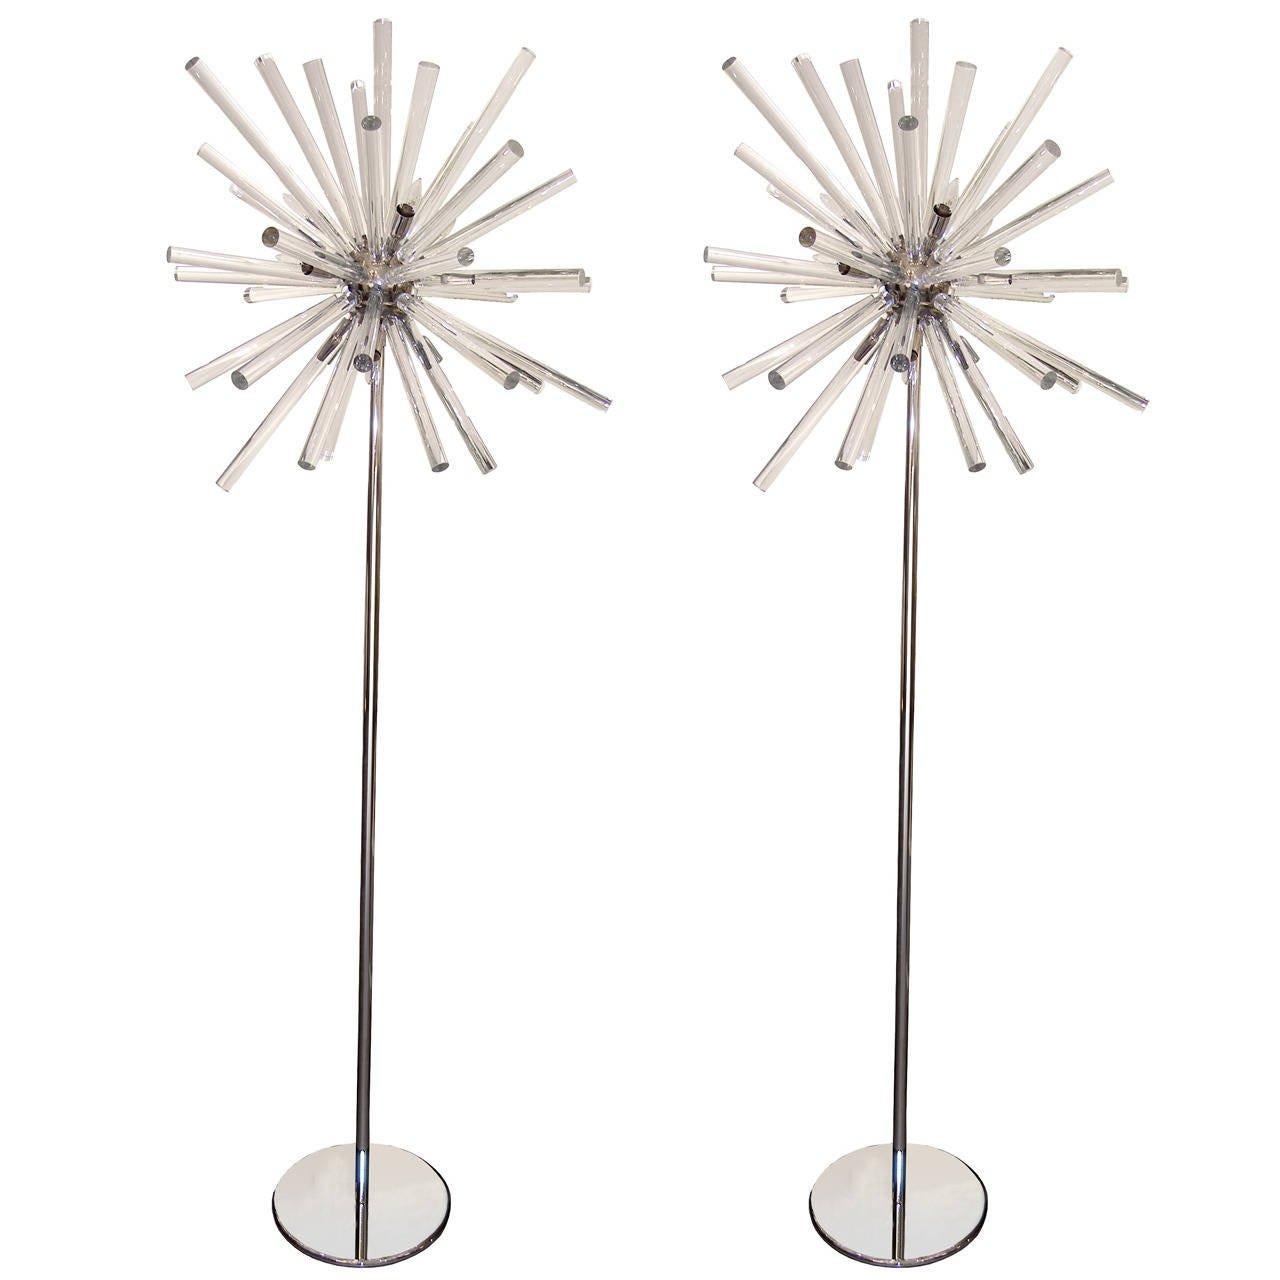 Pair of Stainless Steel and Glass Sputnik Floor Lamps In Excellent Condition For Sale In New York, NY